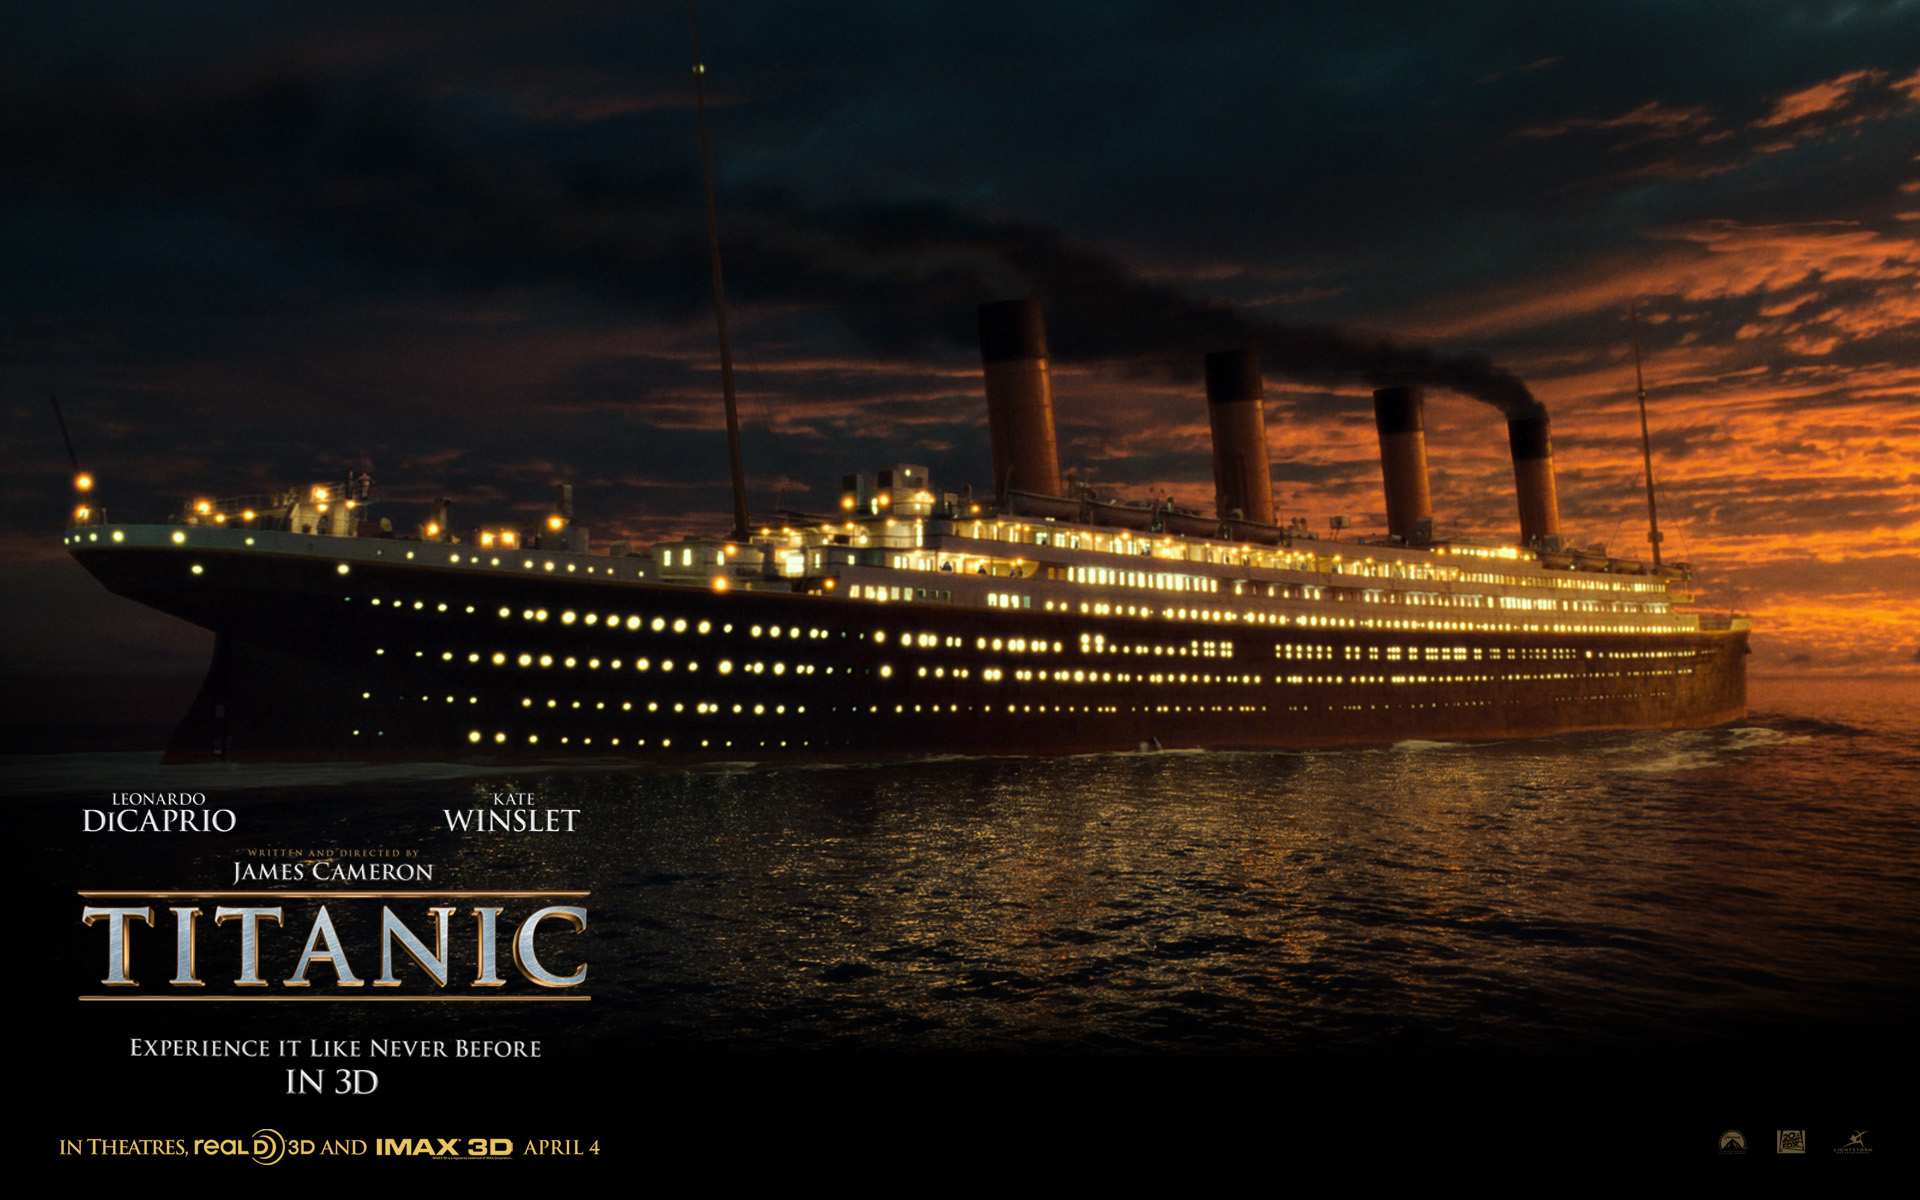 Titanic Image 3d Movie Walpapers HD Wallpaper And